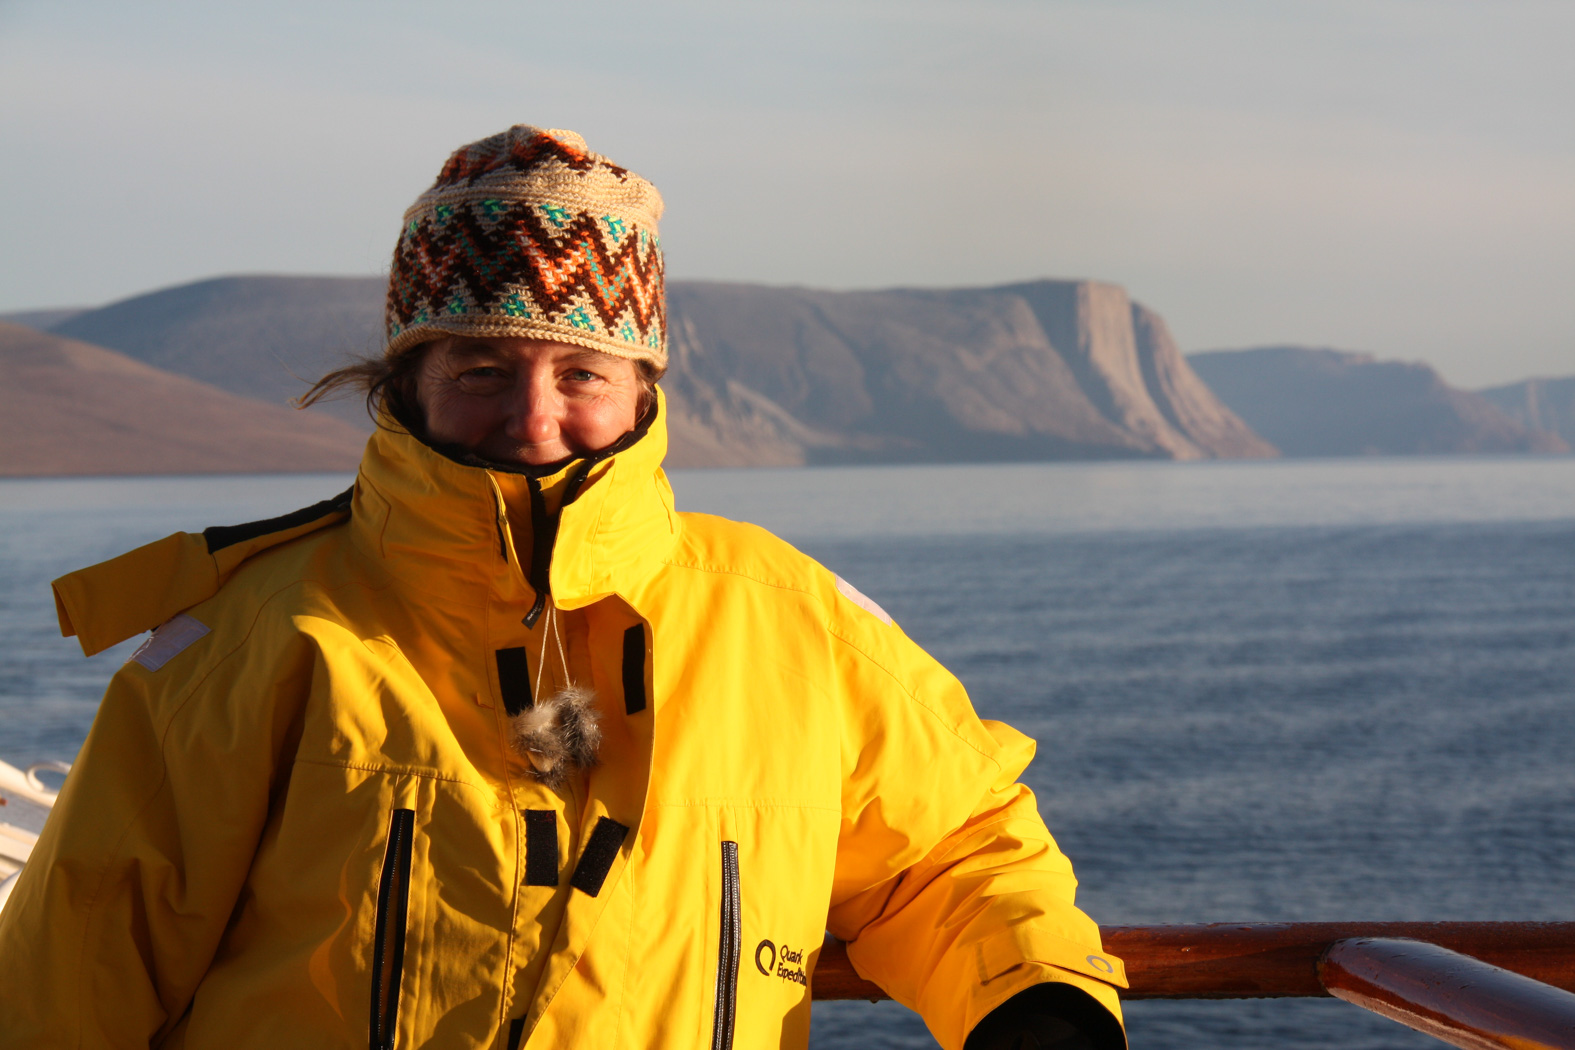 A happy woman wearing a yellow jacket on a cold landscape